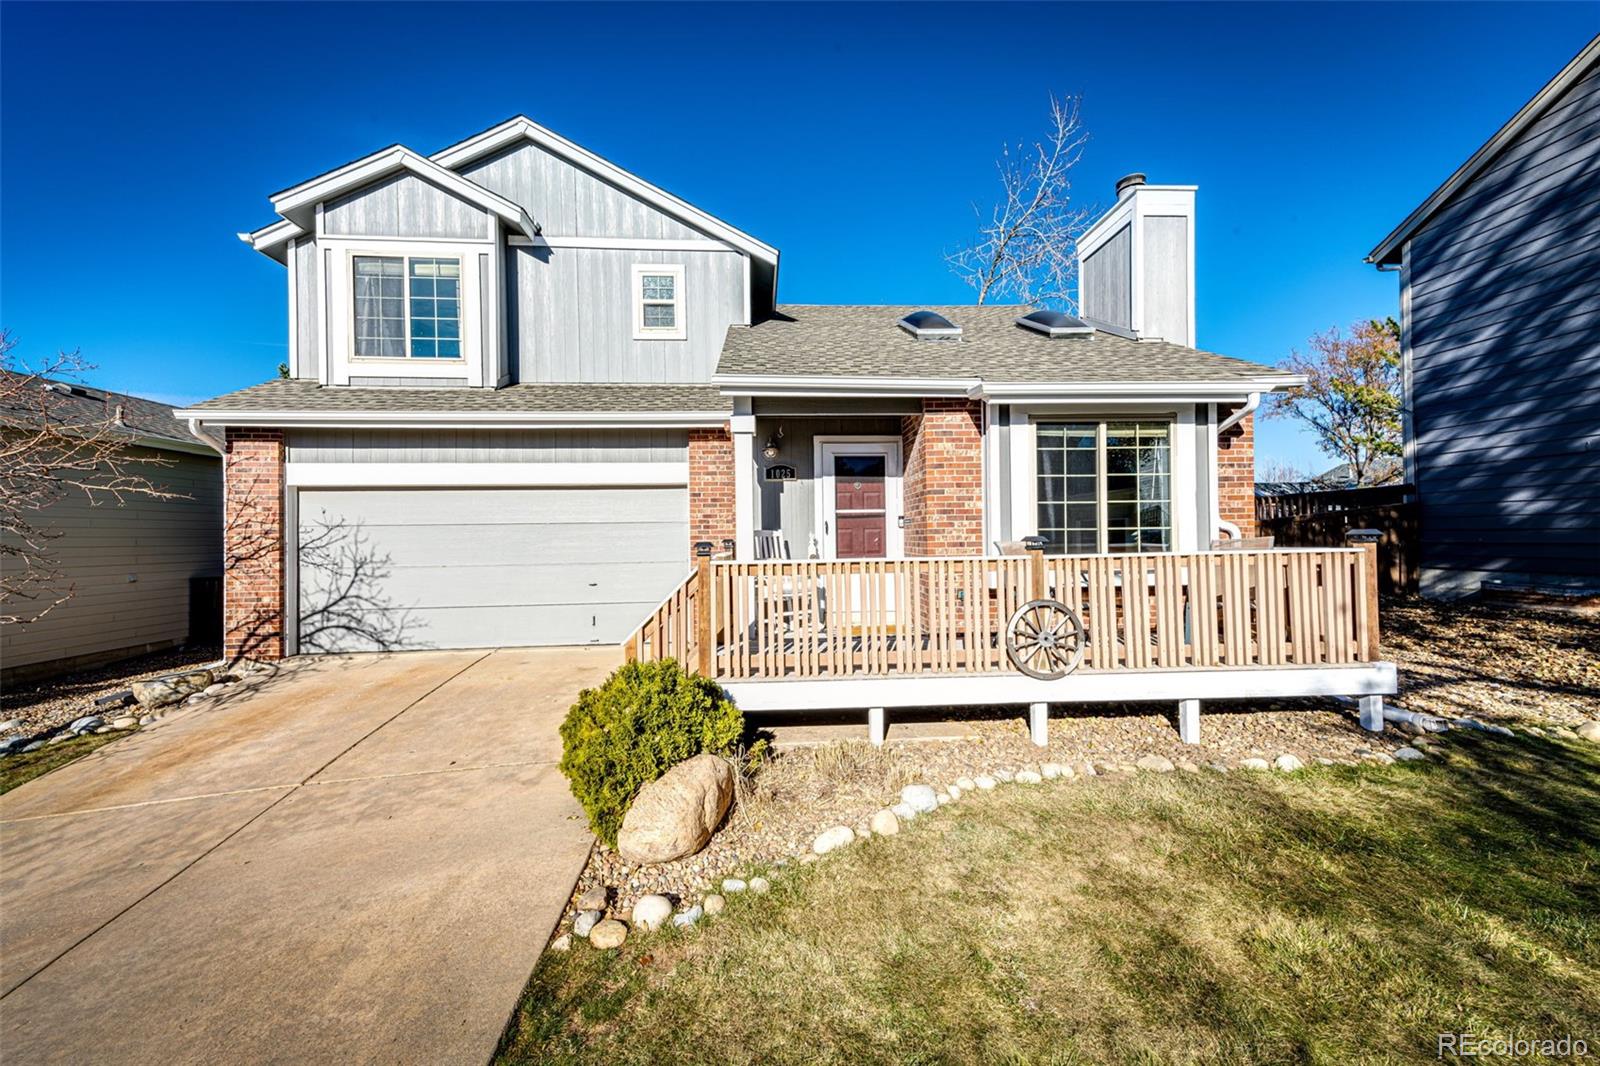 1025  Cherry Blossom Court, highlands ranch MLS: 4598104 Beds: 2 Baths: 2 Price: $500,000